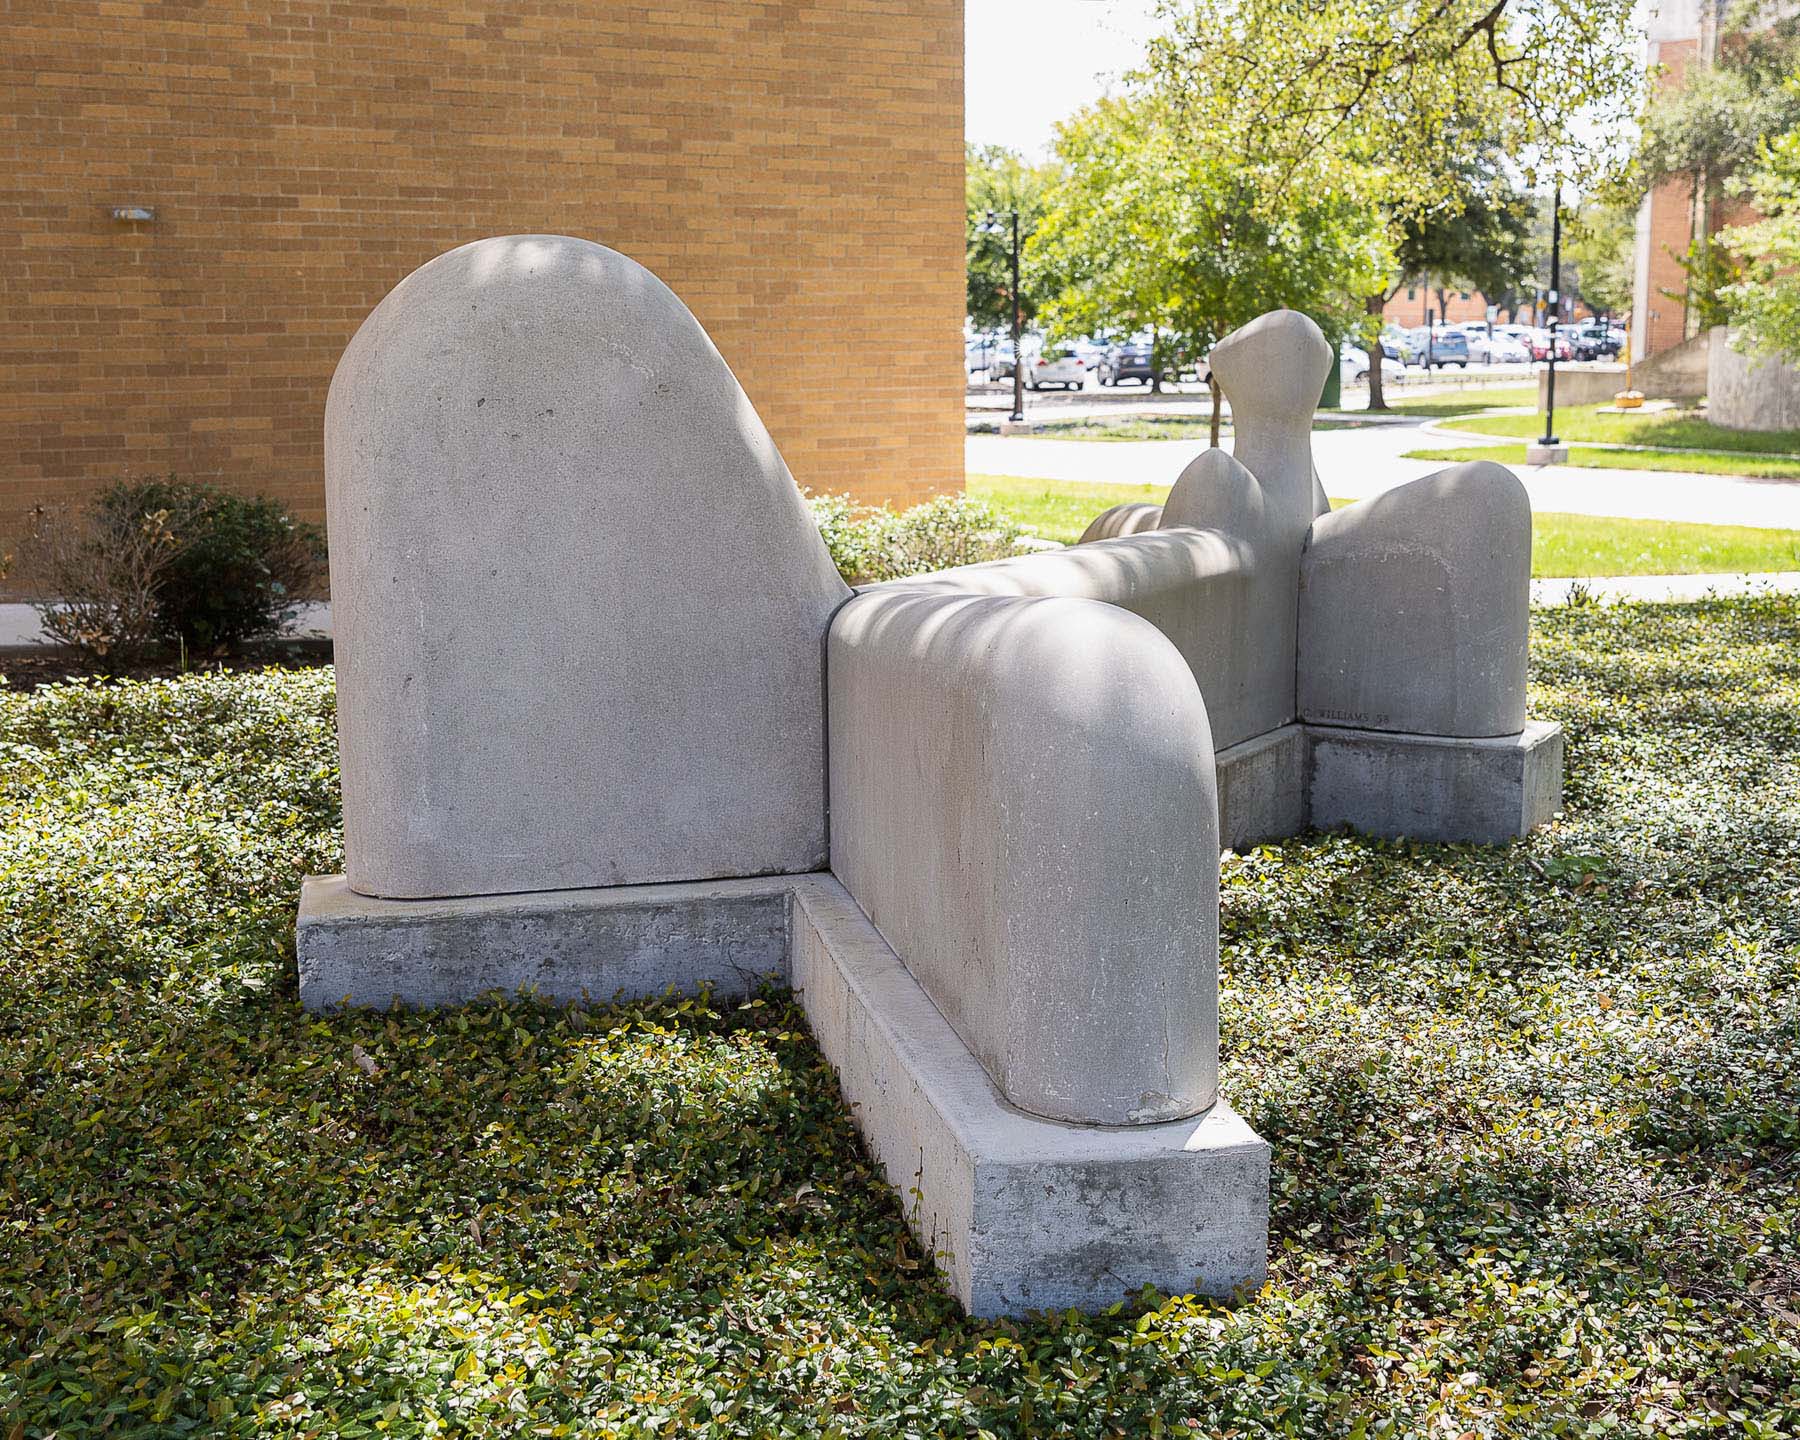 A large, white figural sculpture in a reclining position in an outdoor setting.